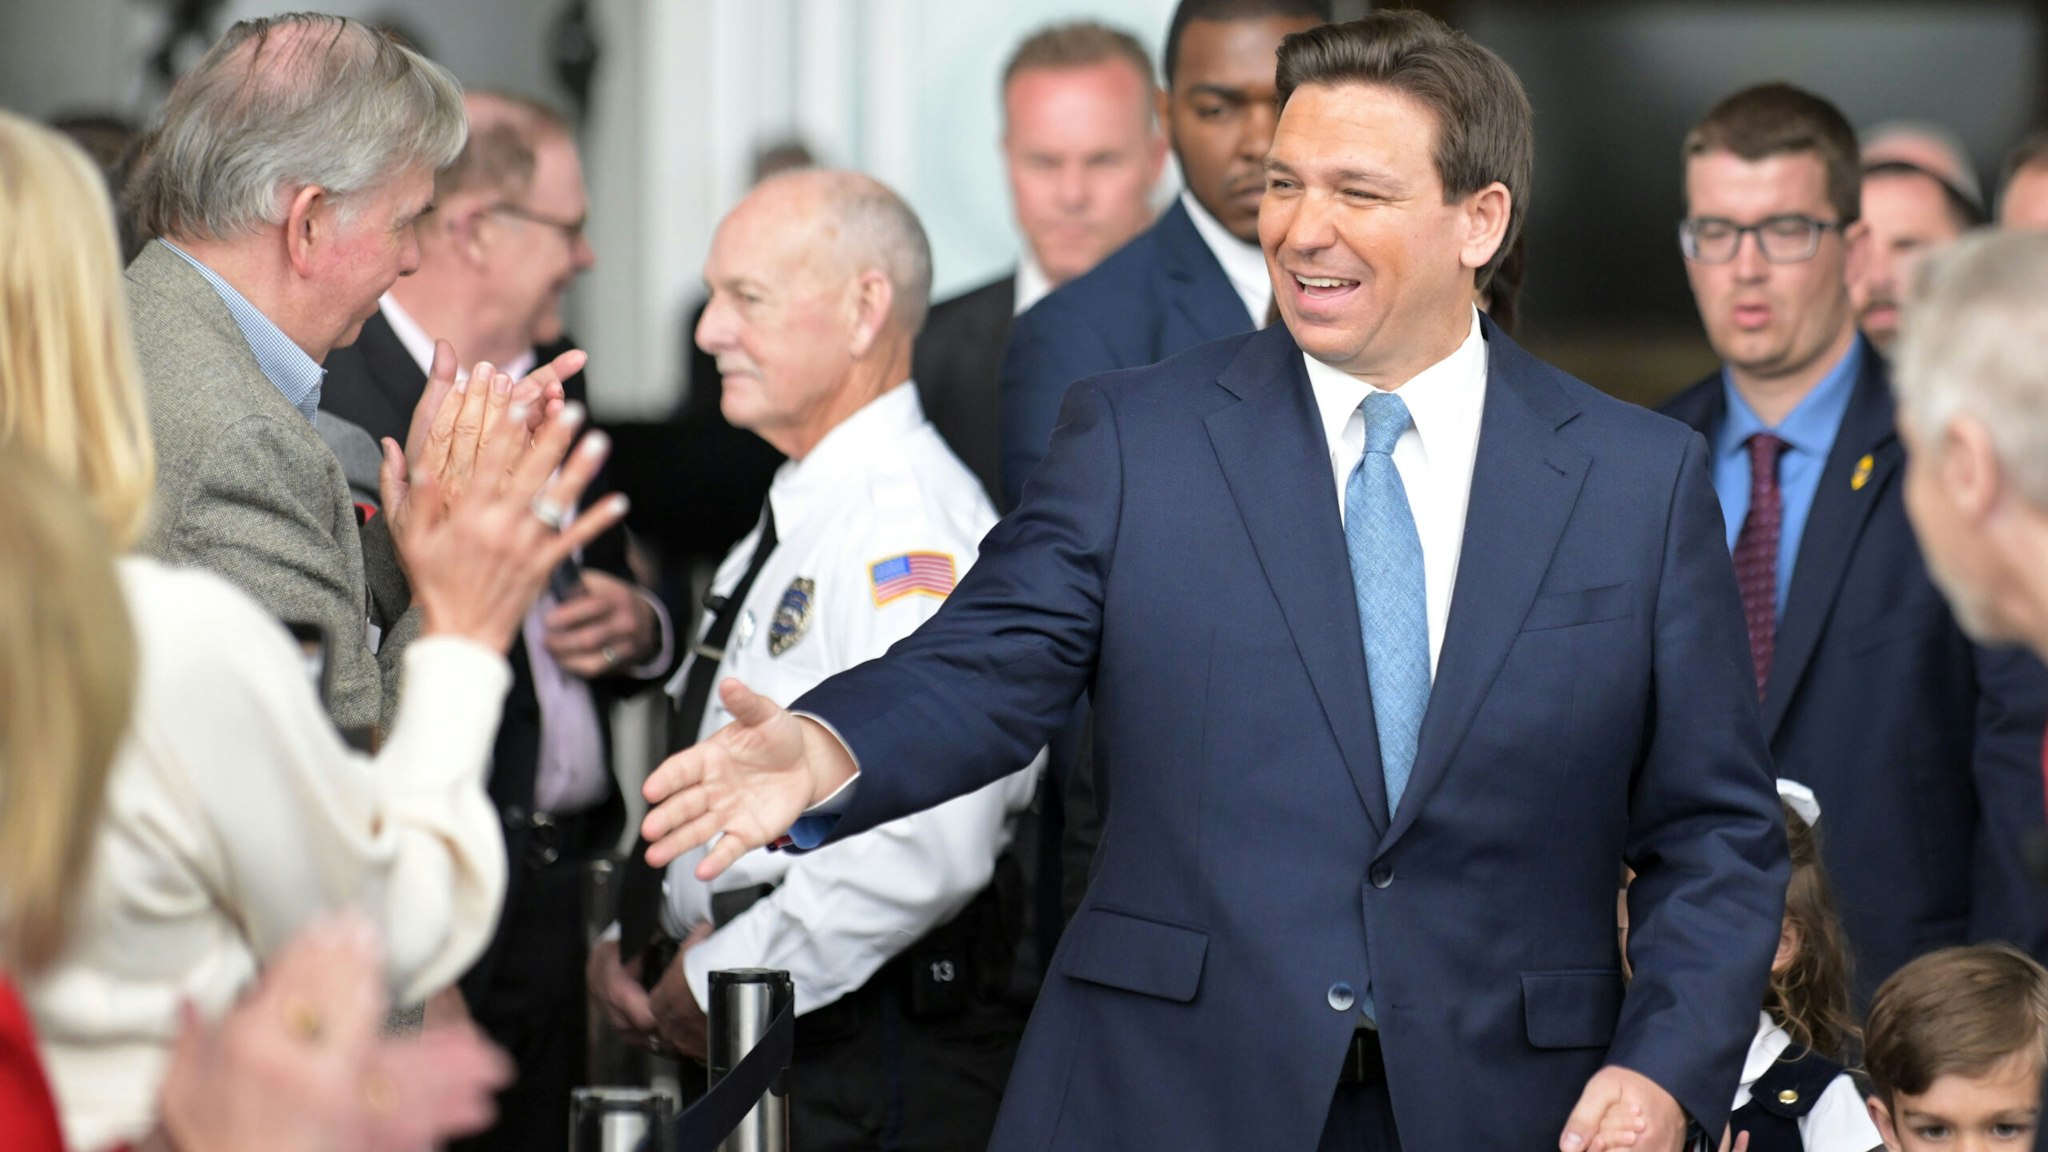 Simi Valley, California March 5, 2023-Florida Governor Ron DeSantis greets donors before speaking at the Ronald Reagan Library Sunday in Simi Valley.